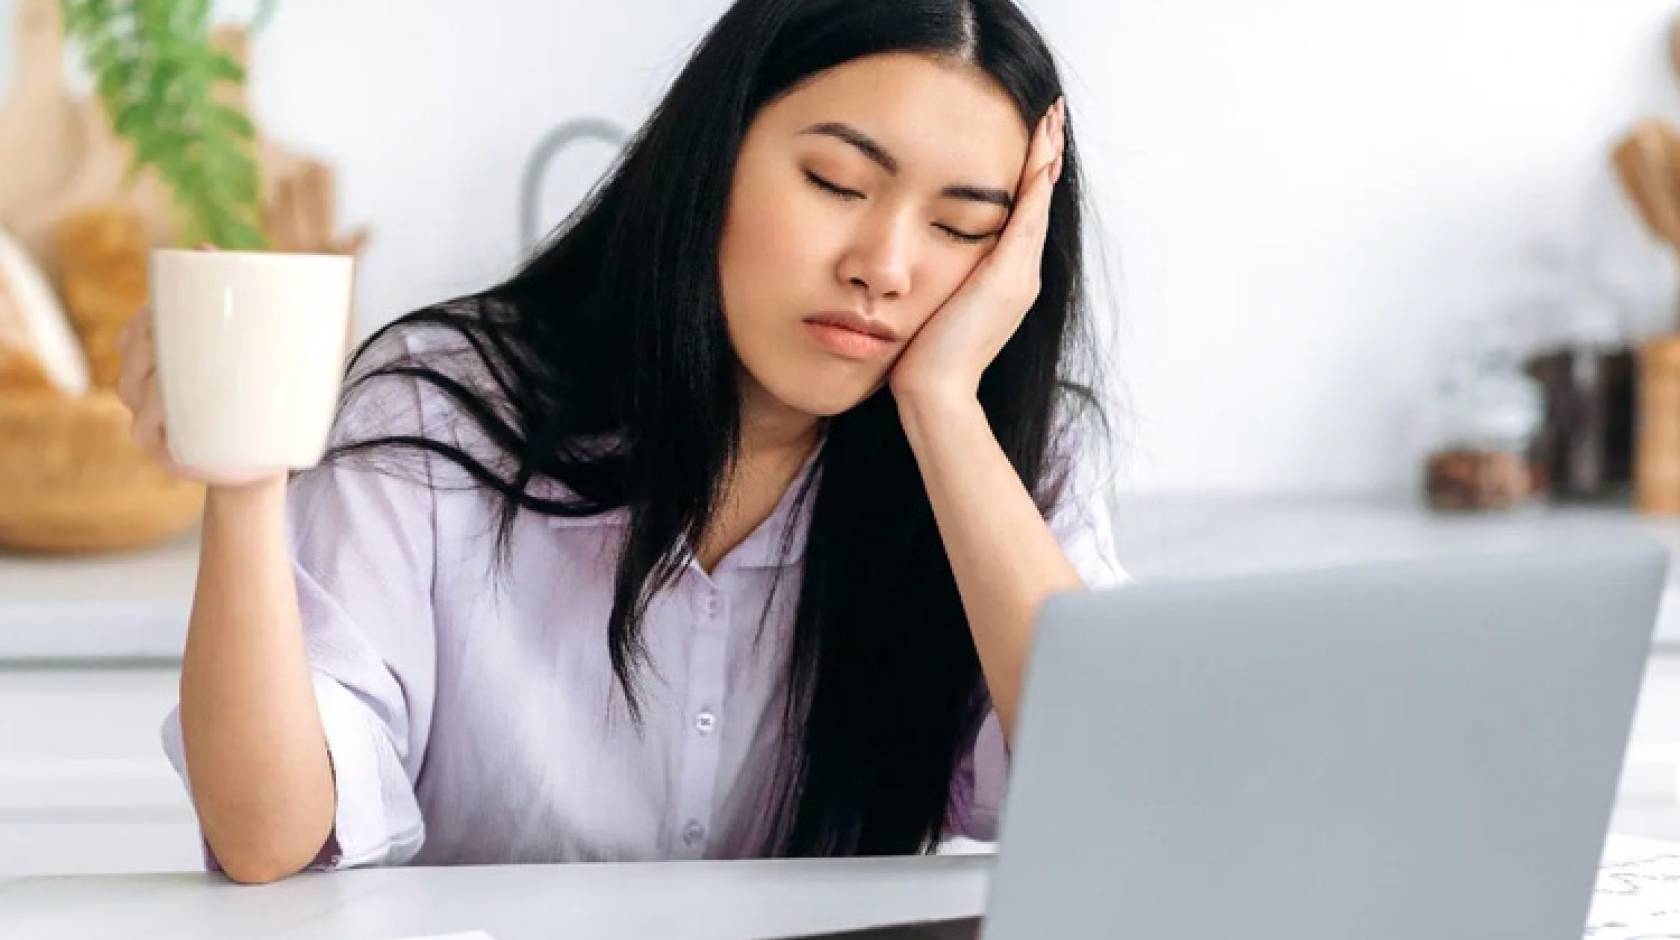 A young woman asleep in front of a laptop